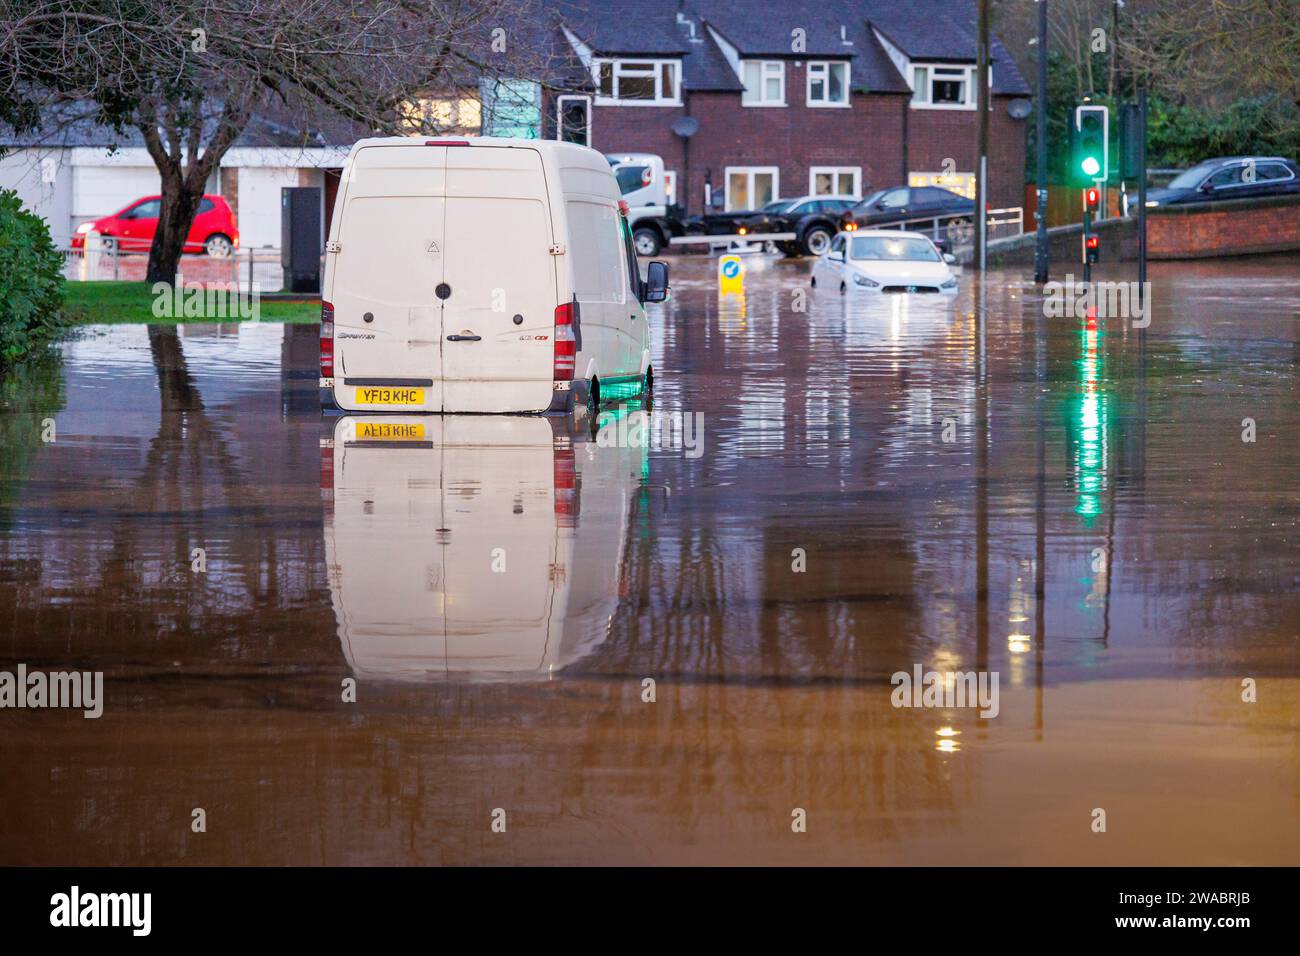 At the start of 2024 Storm Henk saw large parts of the Midlands under water after severe flooding. Pictured, scenes in the village of Polesworth, North Warwickshire where vehicles had become trapped in the deep water. Stock Photo